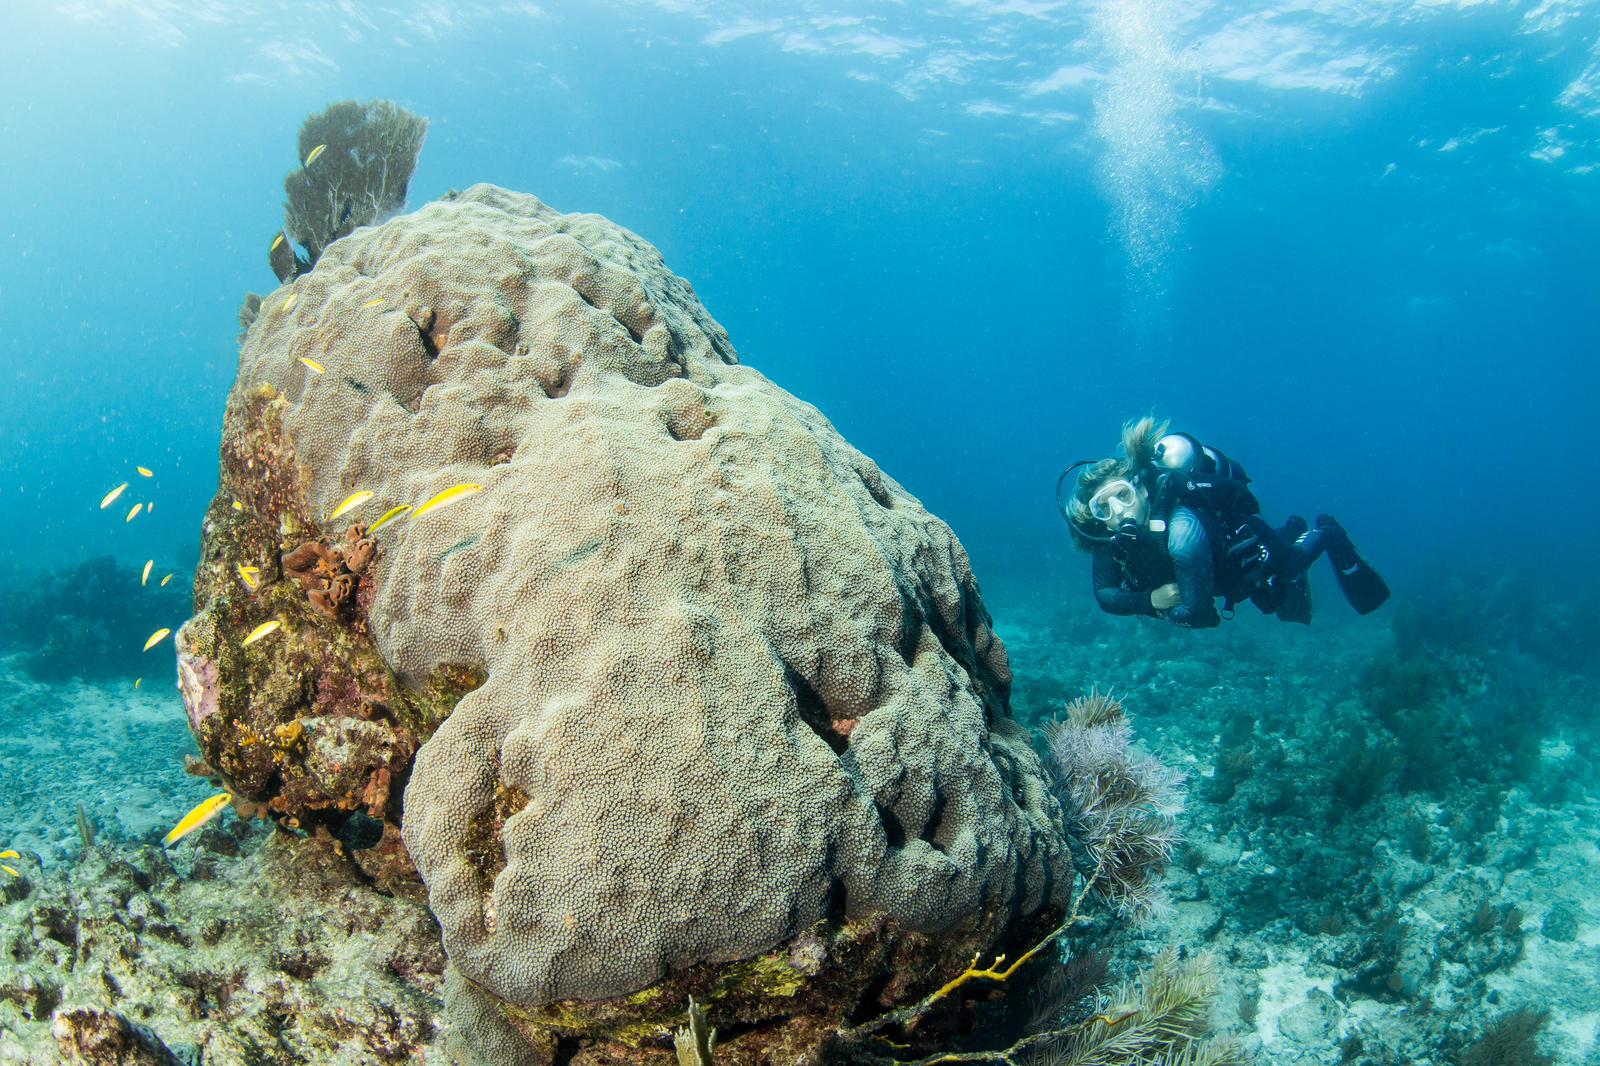 A diver hovers next to massive boulder coral in the Florida keys